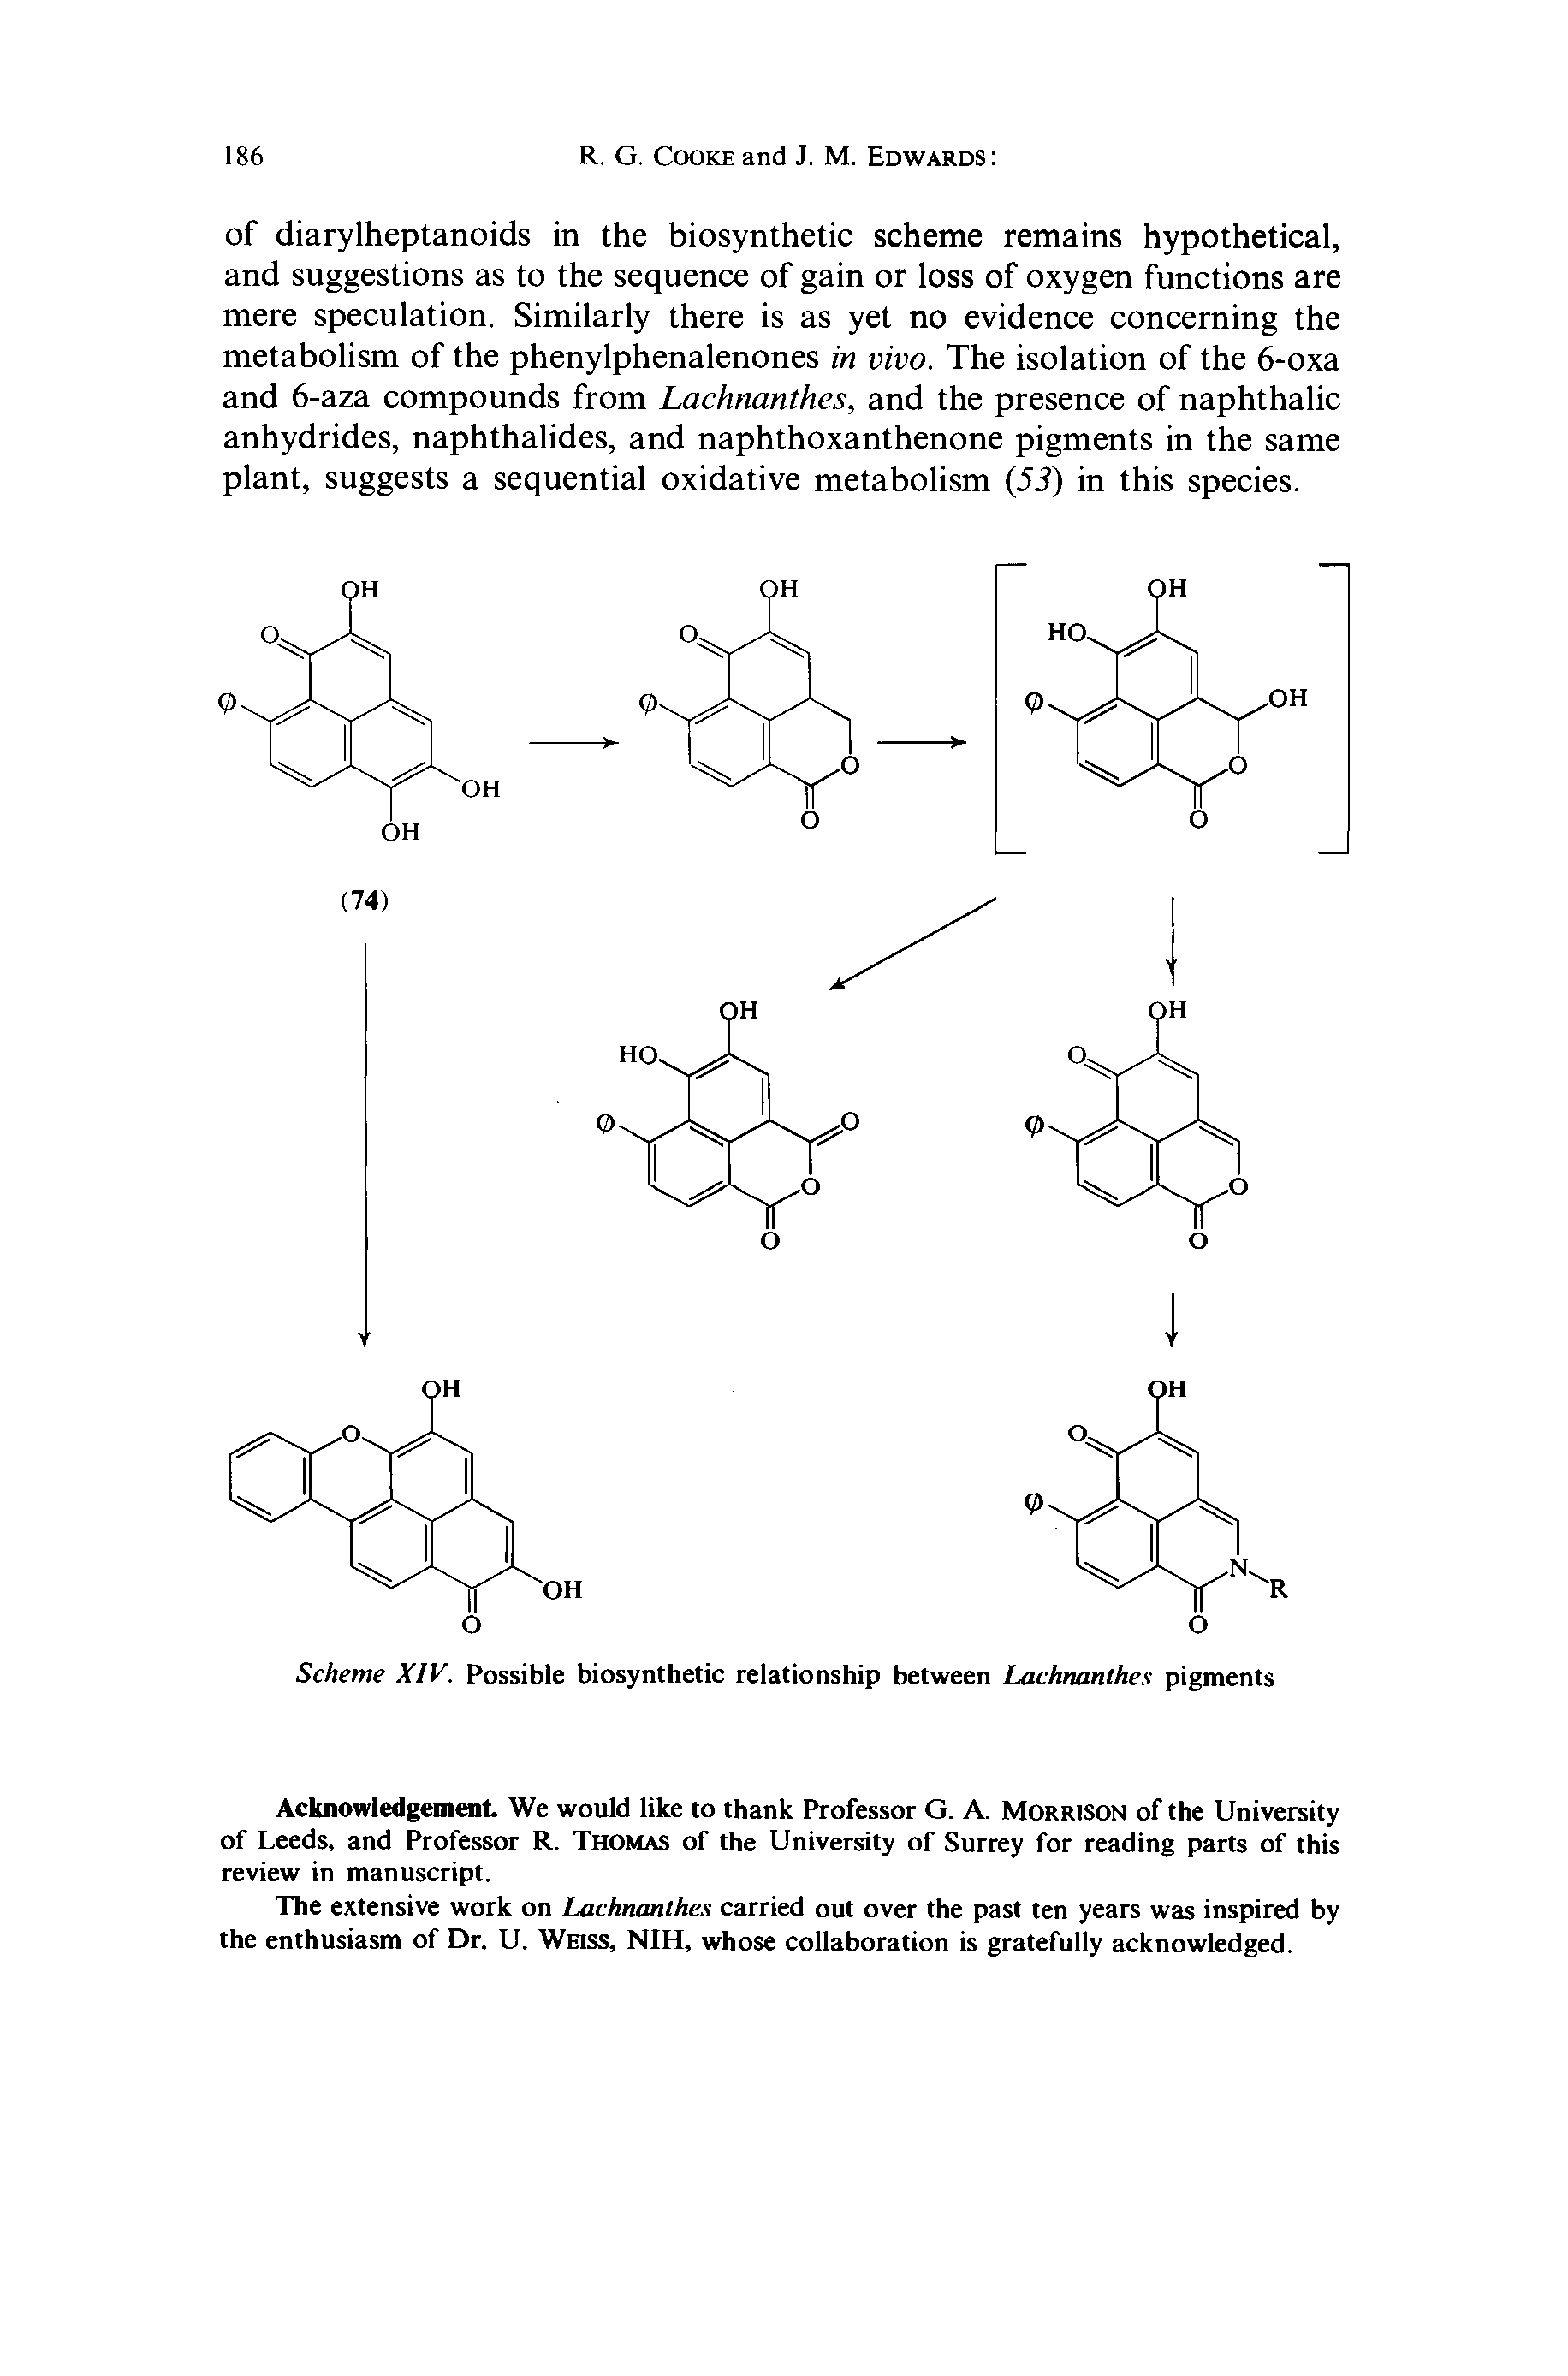 Scheme XIV. Possible biosynthetic relationship between Lachnanthe, pigments...